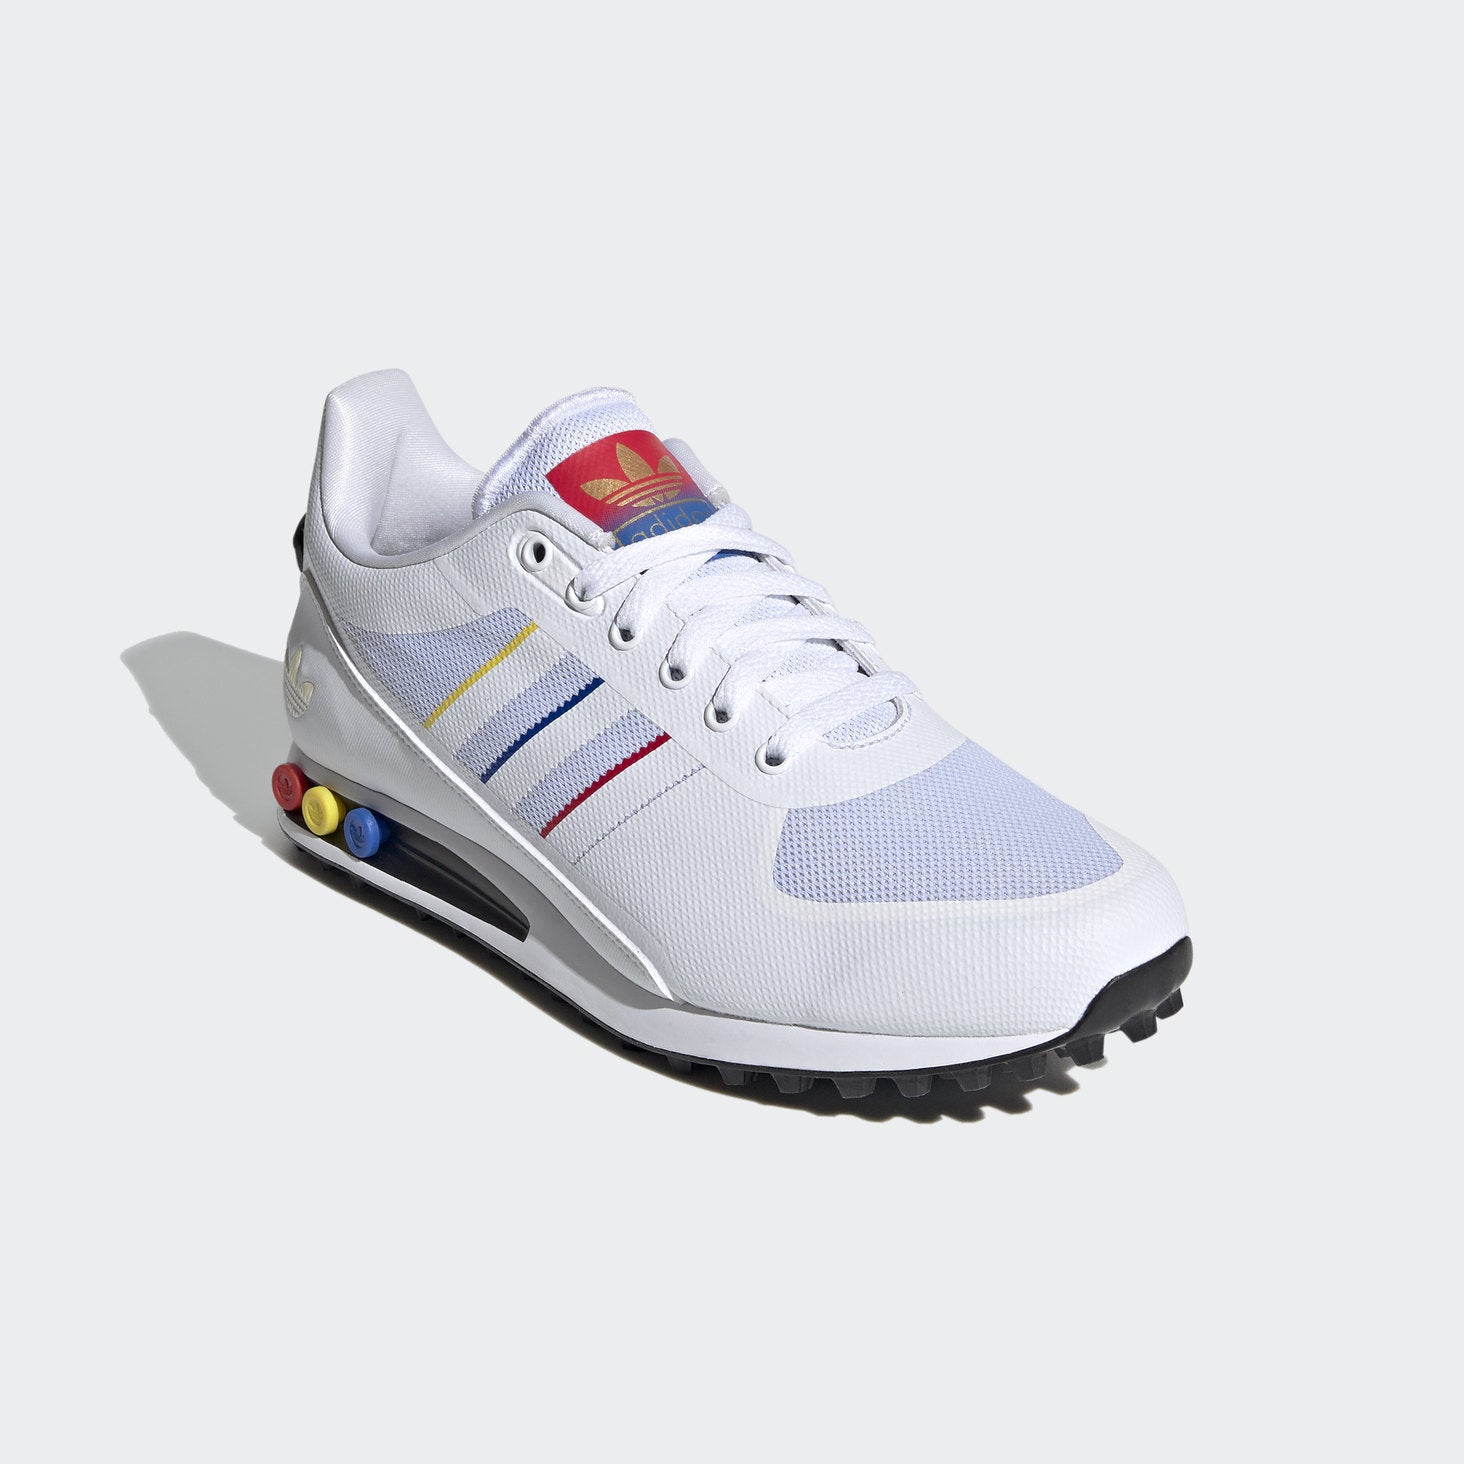 Adidas LA Trainer II in White/Blue/Red | Find Your Sole